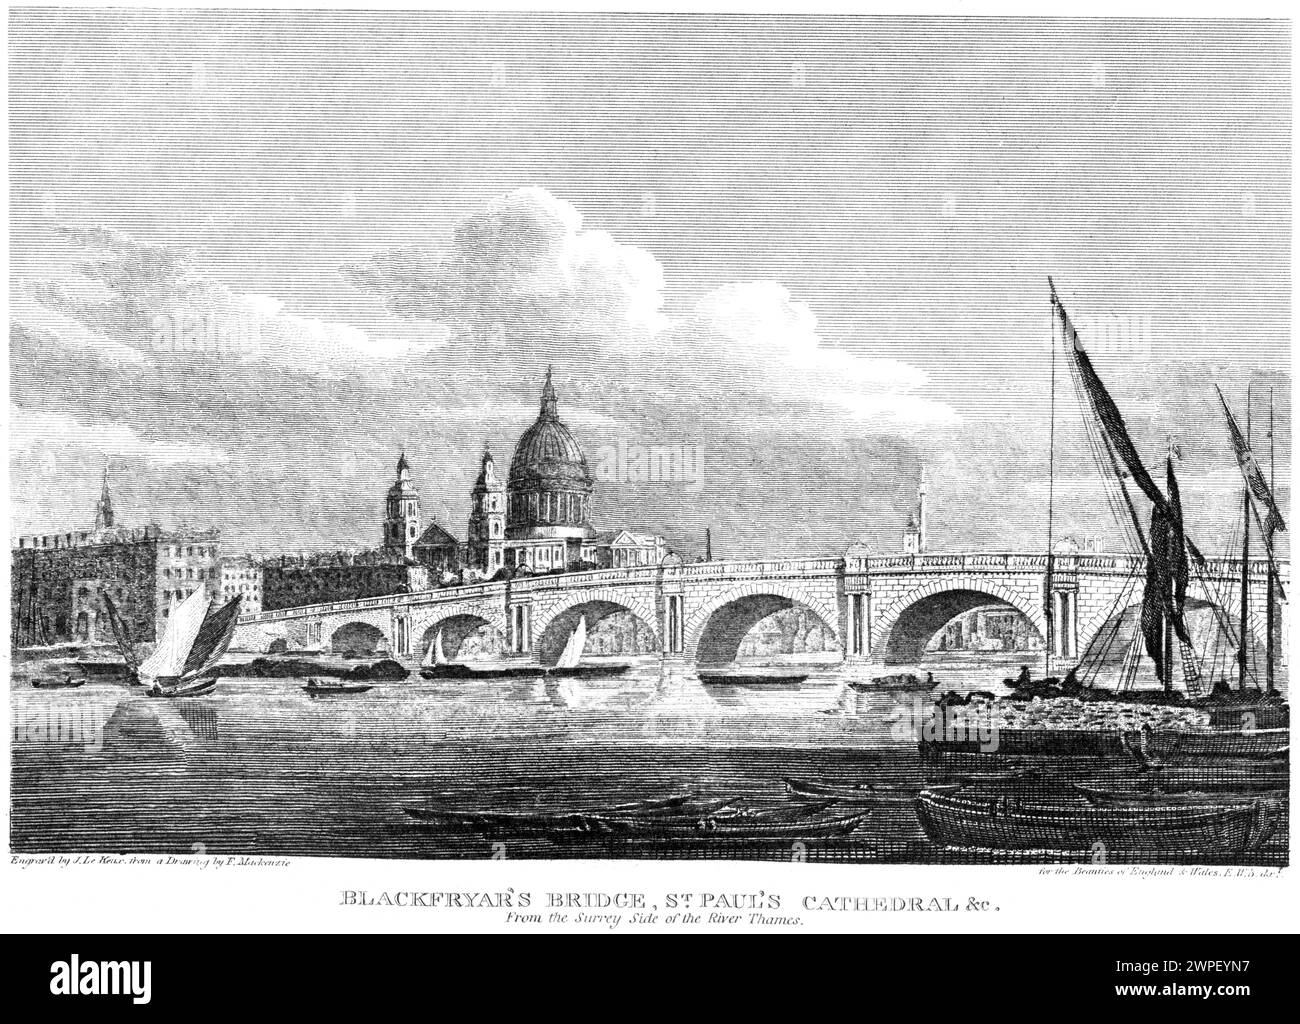 Engraving of Blackfryar's Bridge, St Pauls Cathedral &c. From the Surrey Side of the River Thames, London UK scanned at high res from a book of 1815. Stock Photo